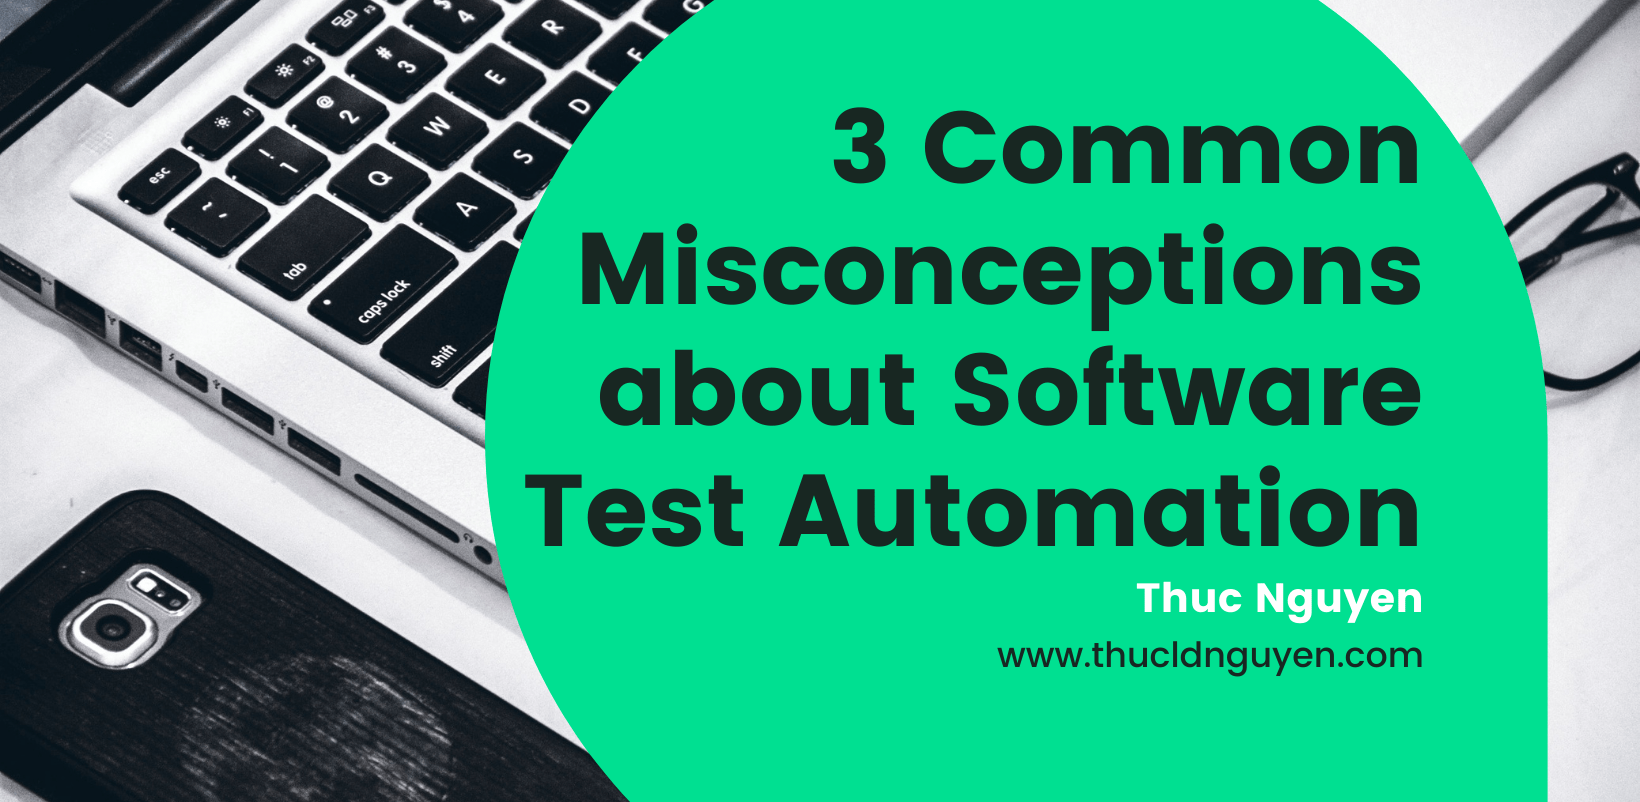 3 Common Misconceptions about Software Test Automation - Featured image